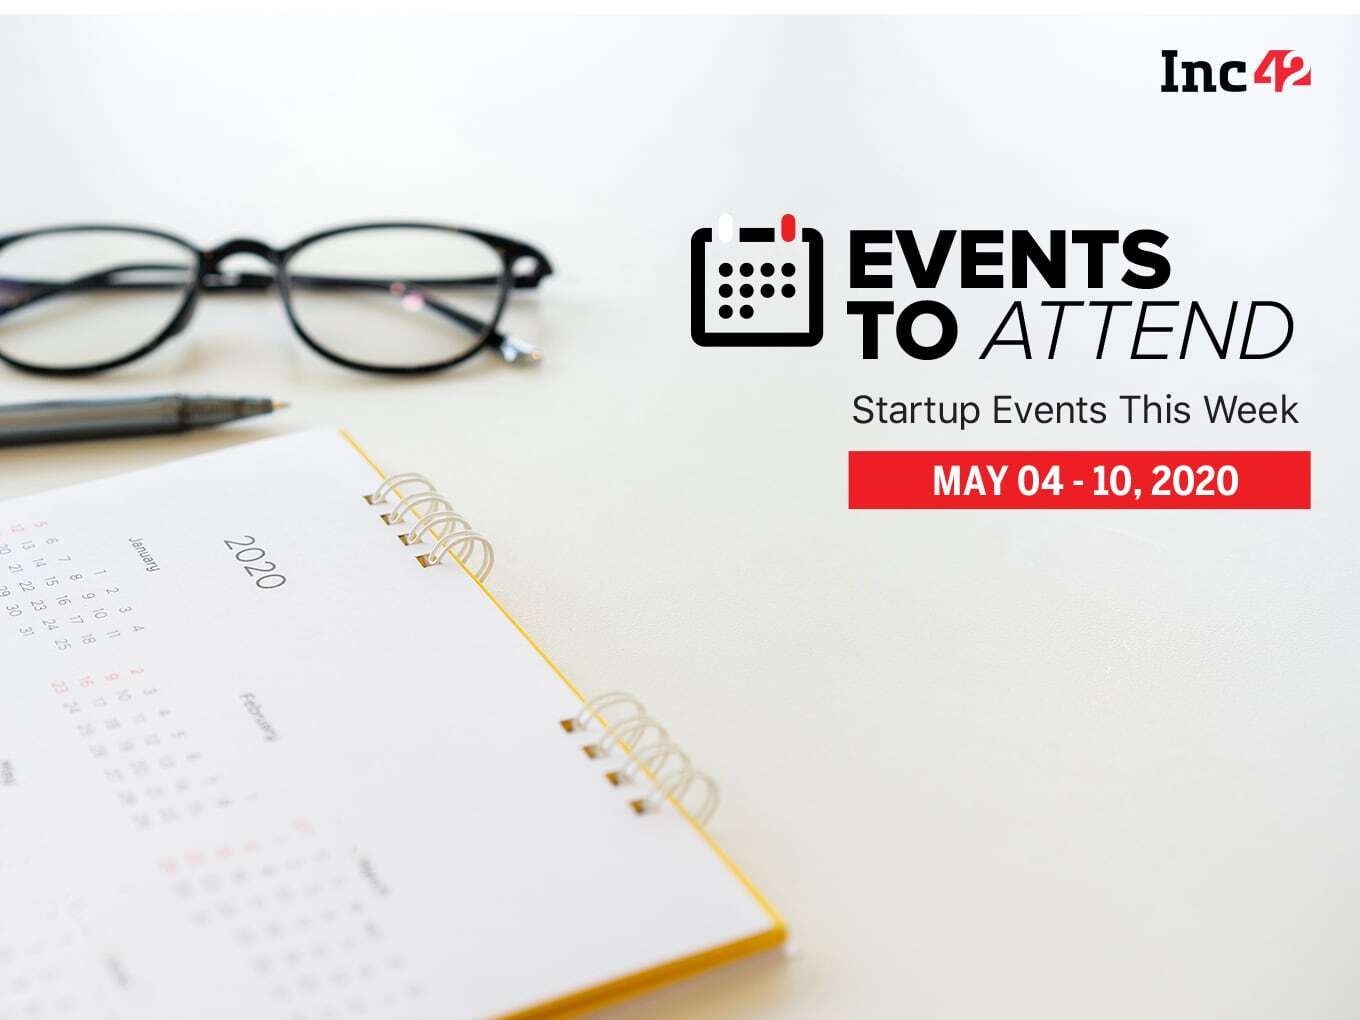 Startup Events This Week: Inc42 Masterclass With Sanjay Mehta, AMA With Deskera’s CEO